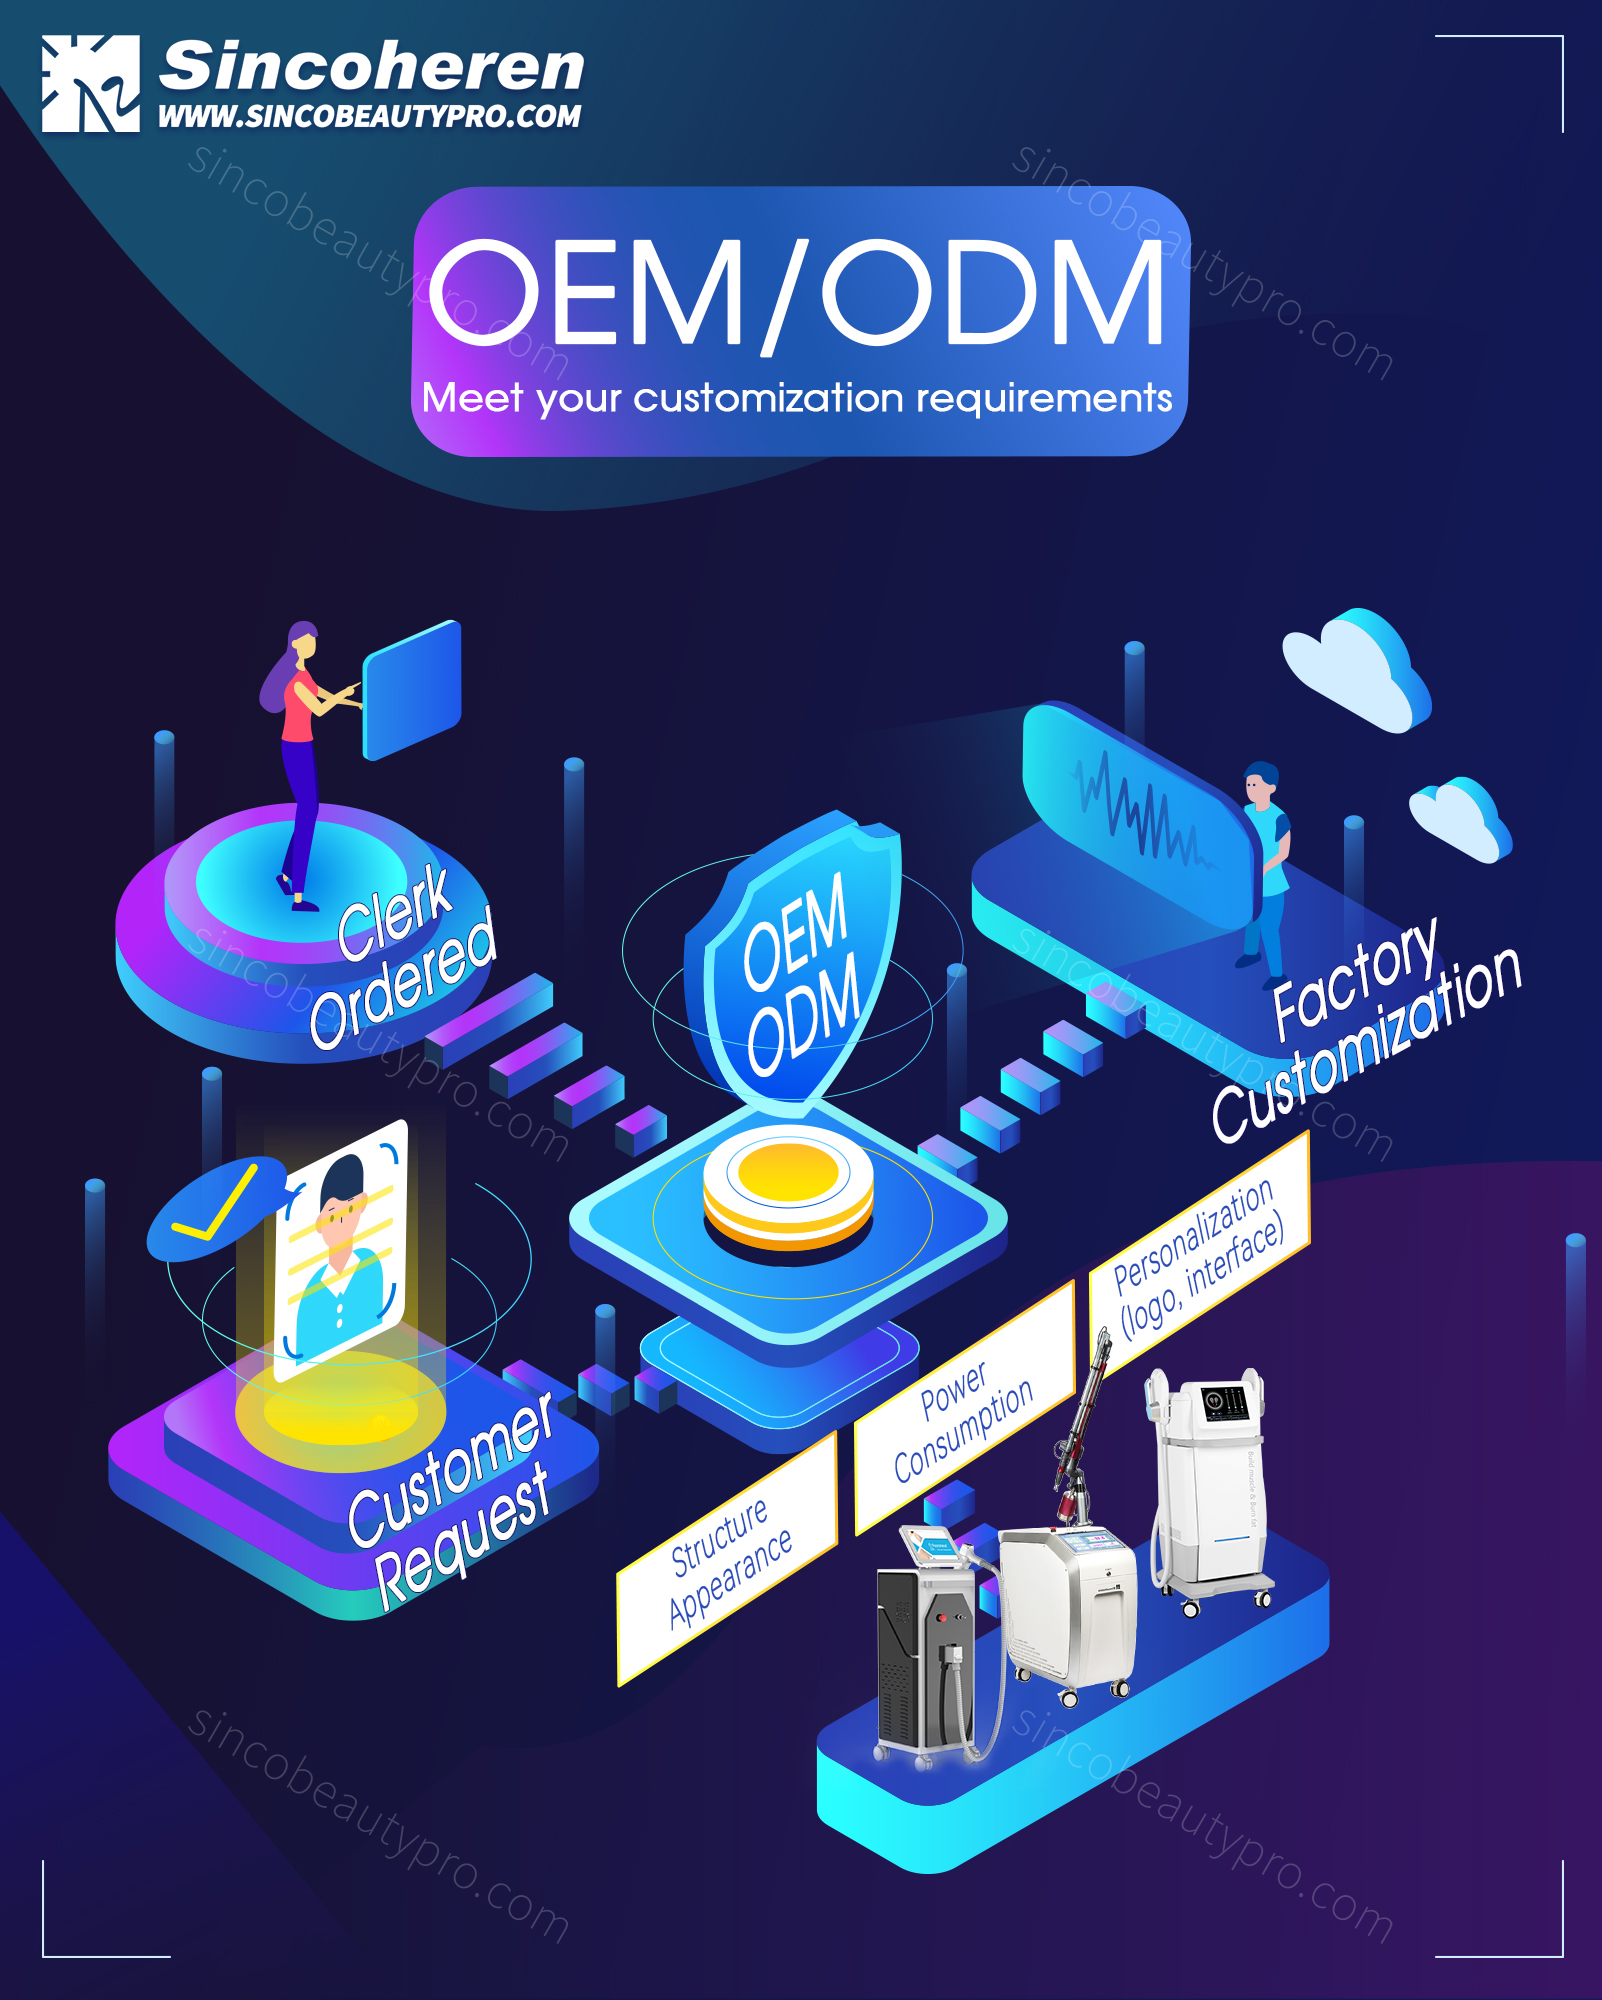 Product Services – ODM&OEM